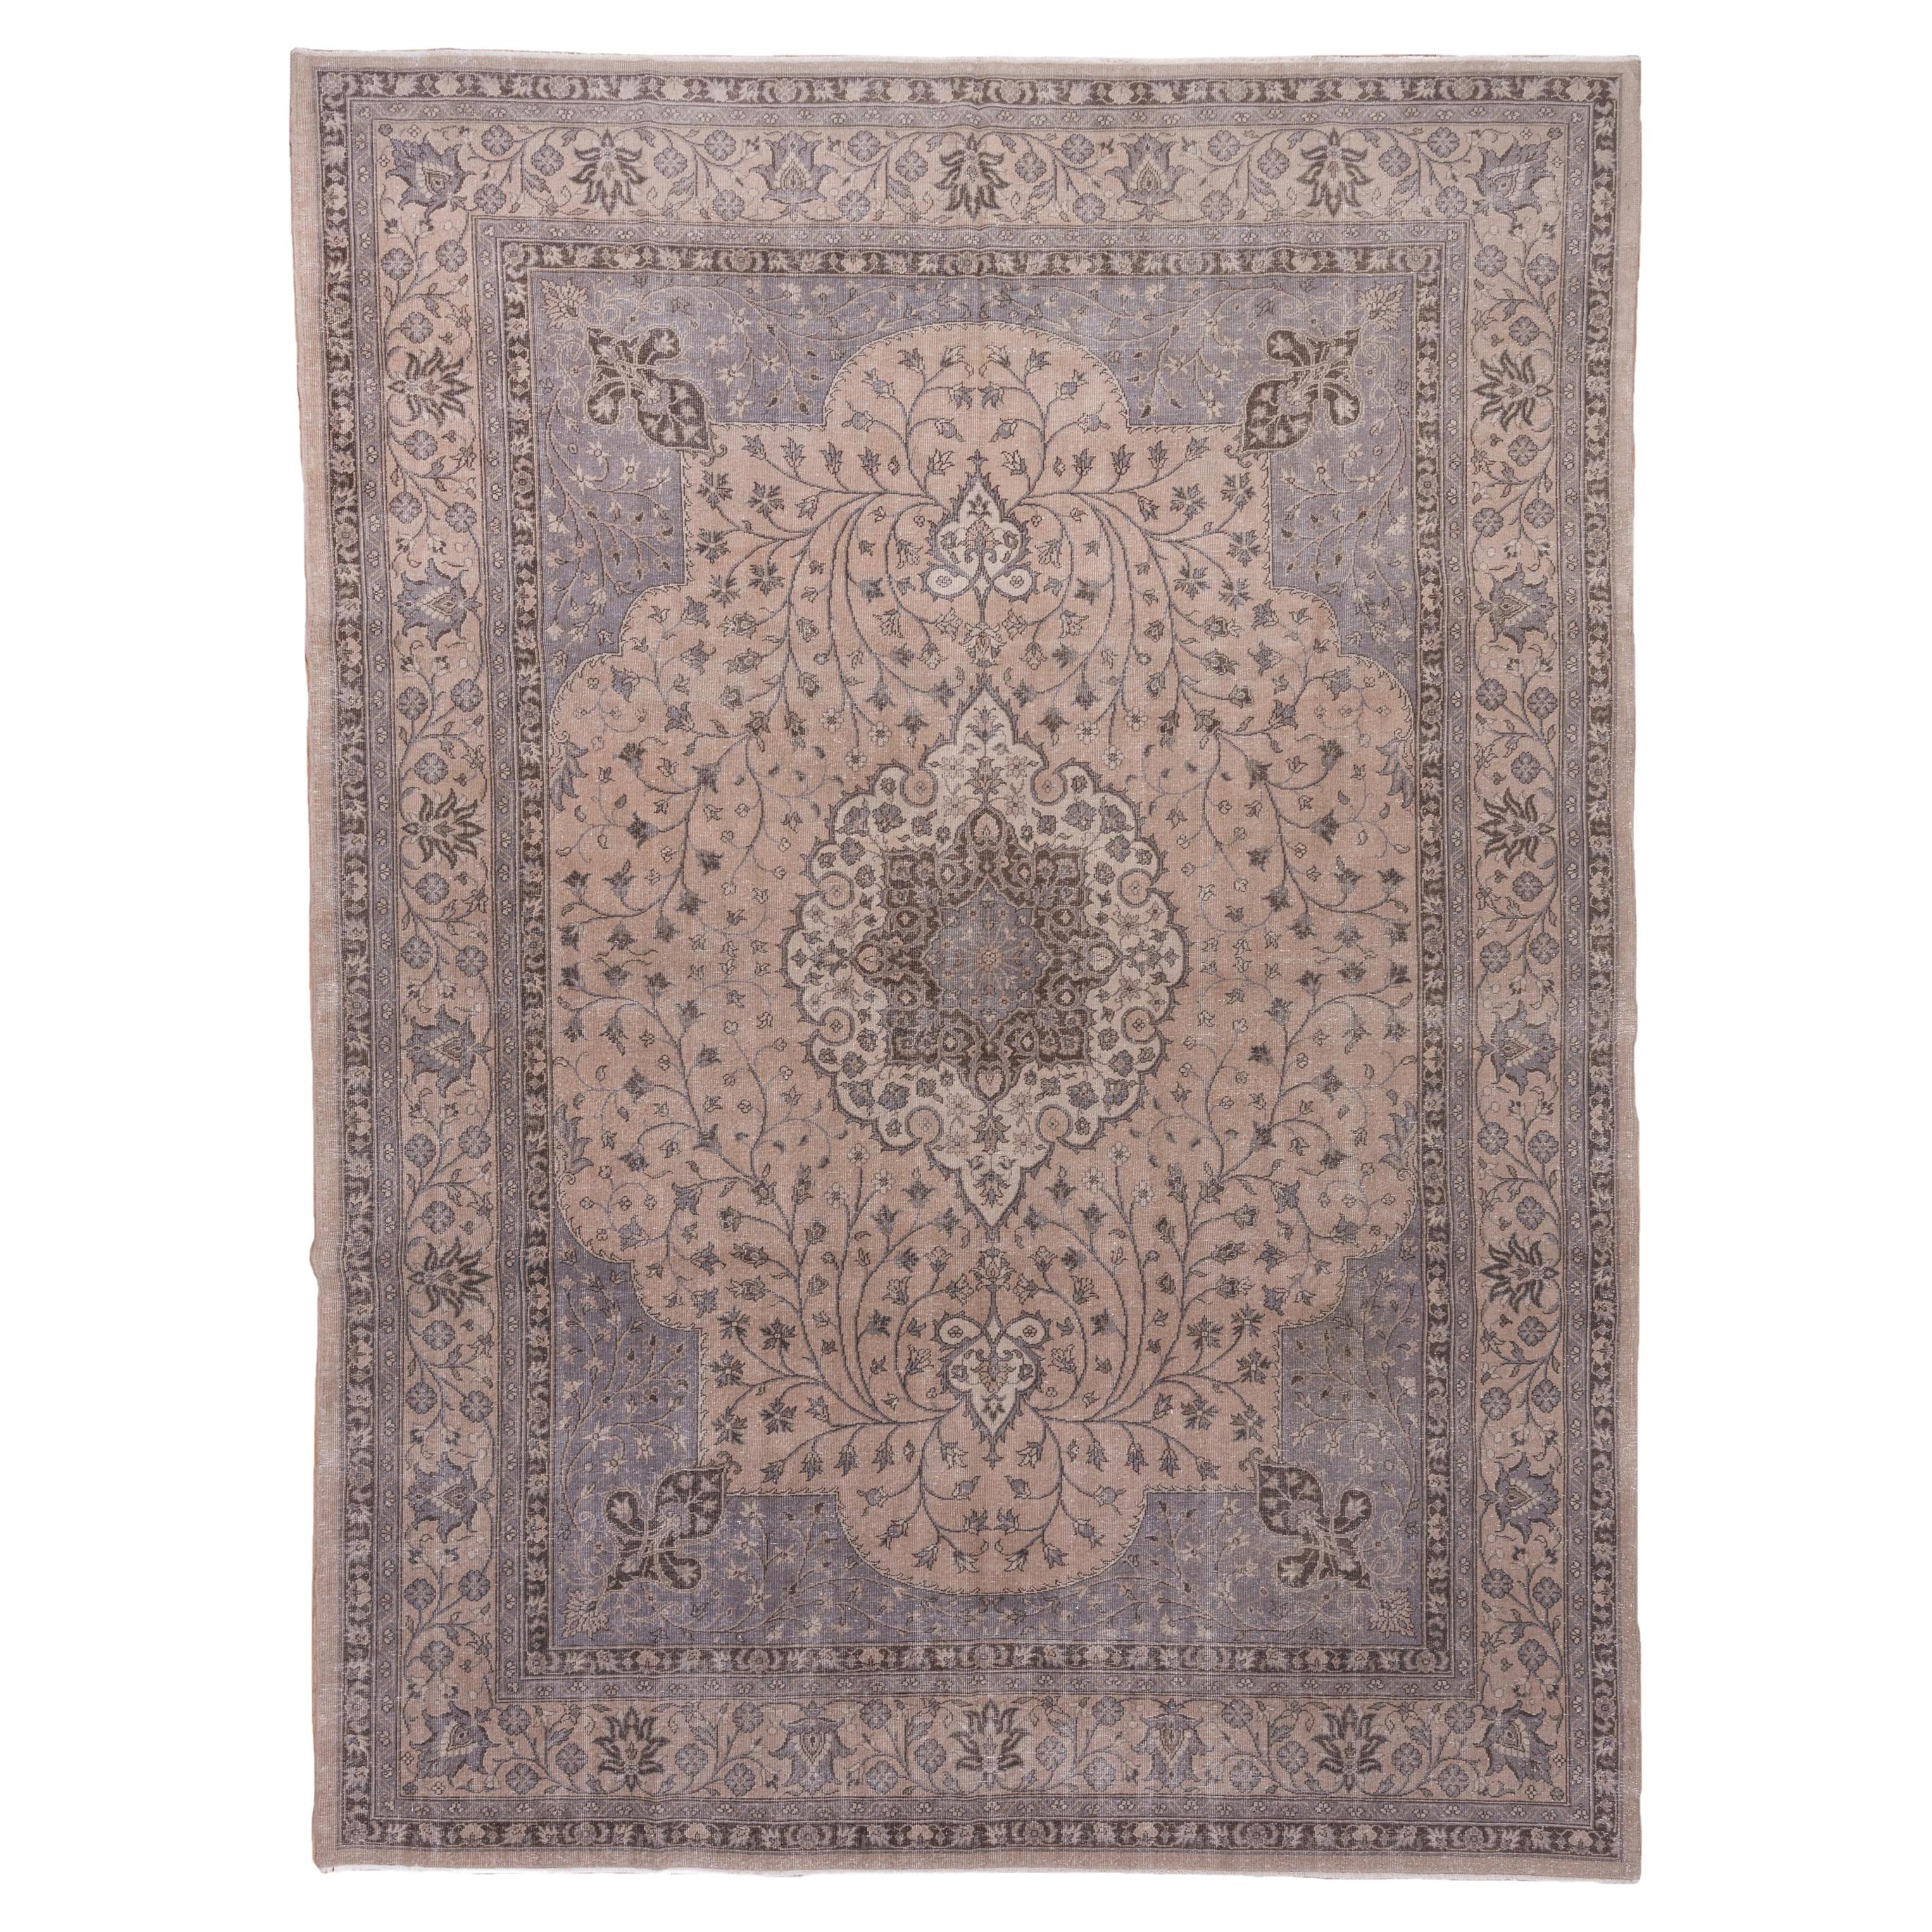 Antique Turkish Sivas Rug, Light Brown Field, Lavender and Gray Outer Field For Sale